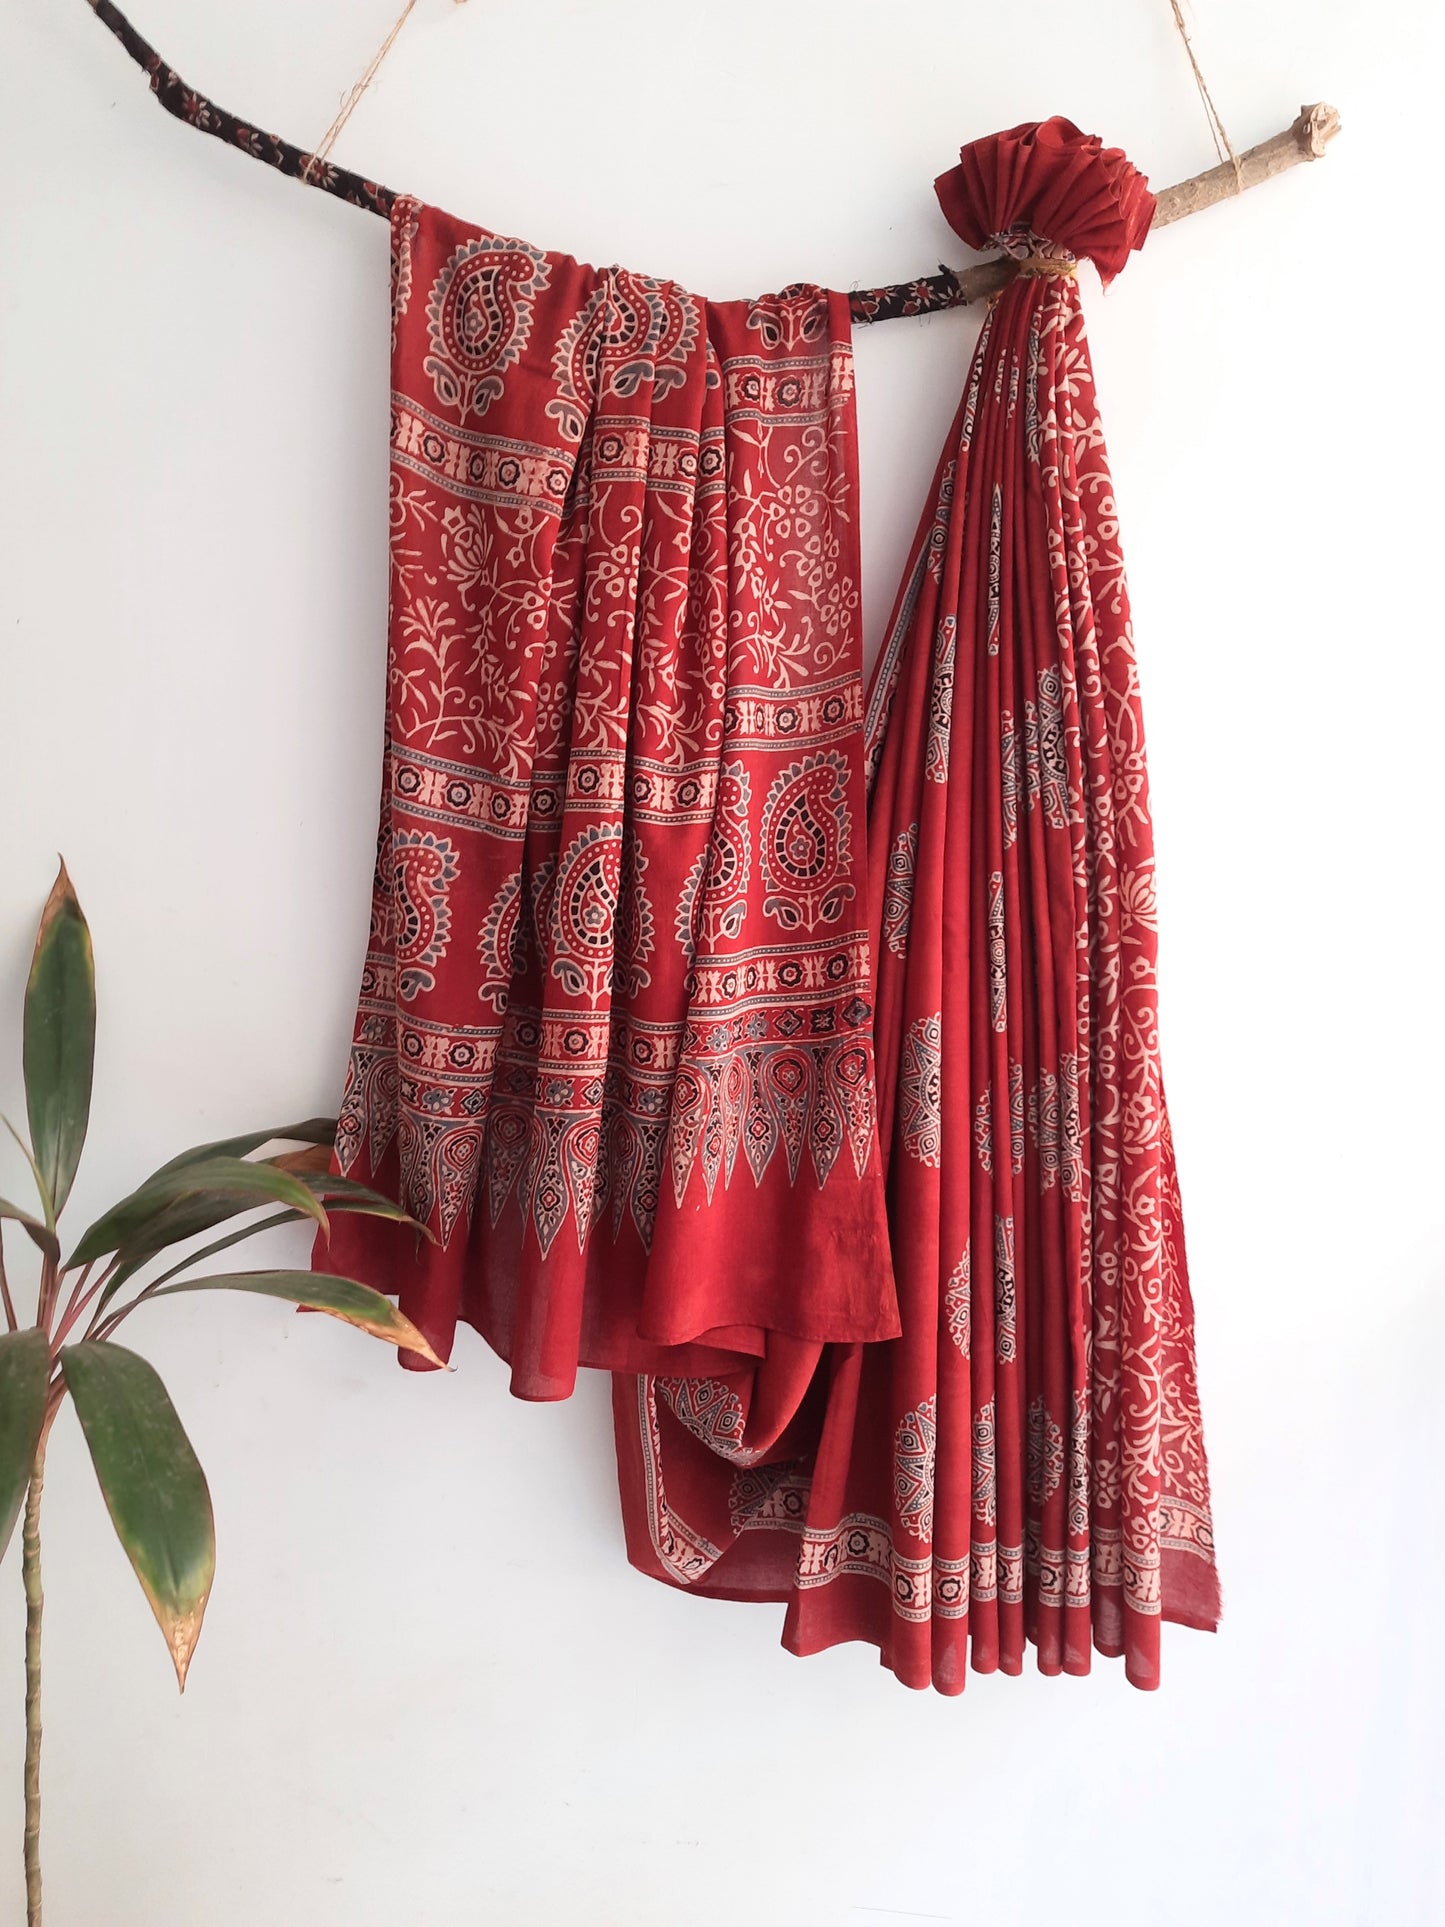 Experience the beauty of slow fashion with our Madder Red Ajrakh Cotton Saree. Carefully crafted by skilled artisans, this saree features a stunning madder dye and intricate ajrakh hand block printing. Made with pure cotton, it comes with a running blouse for convenience. Create a sustainable and stylish wardrobe with this unique piece